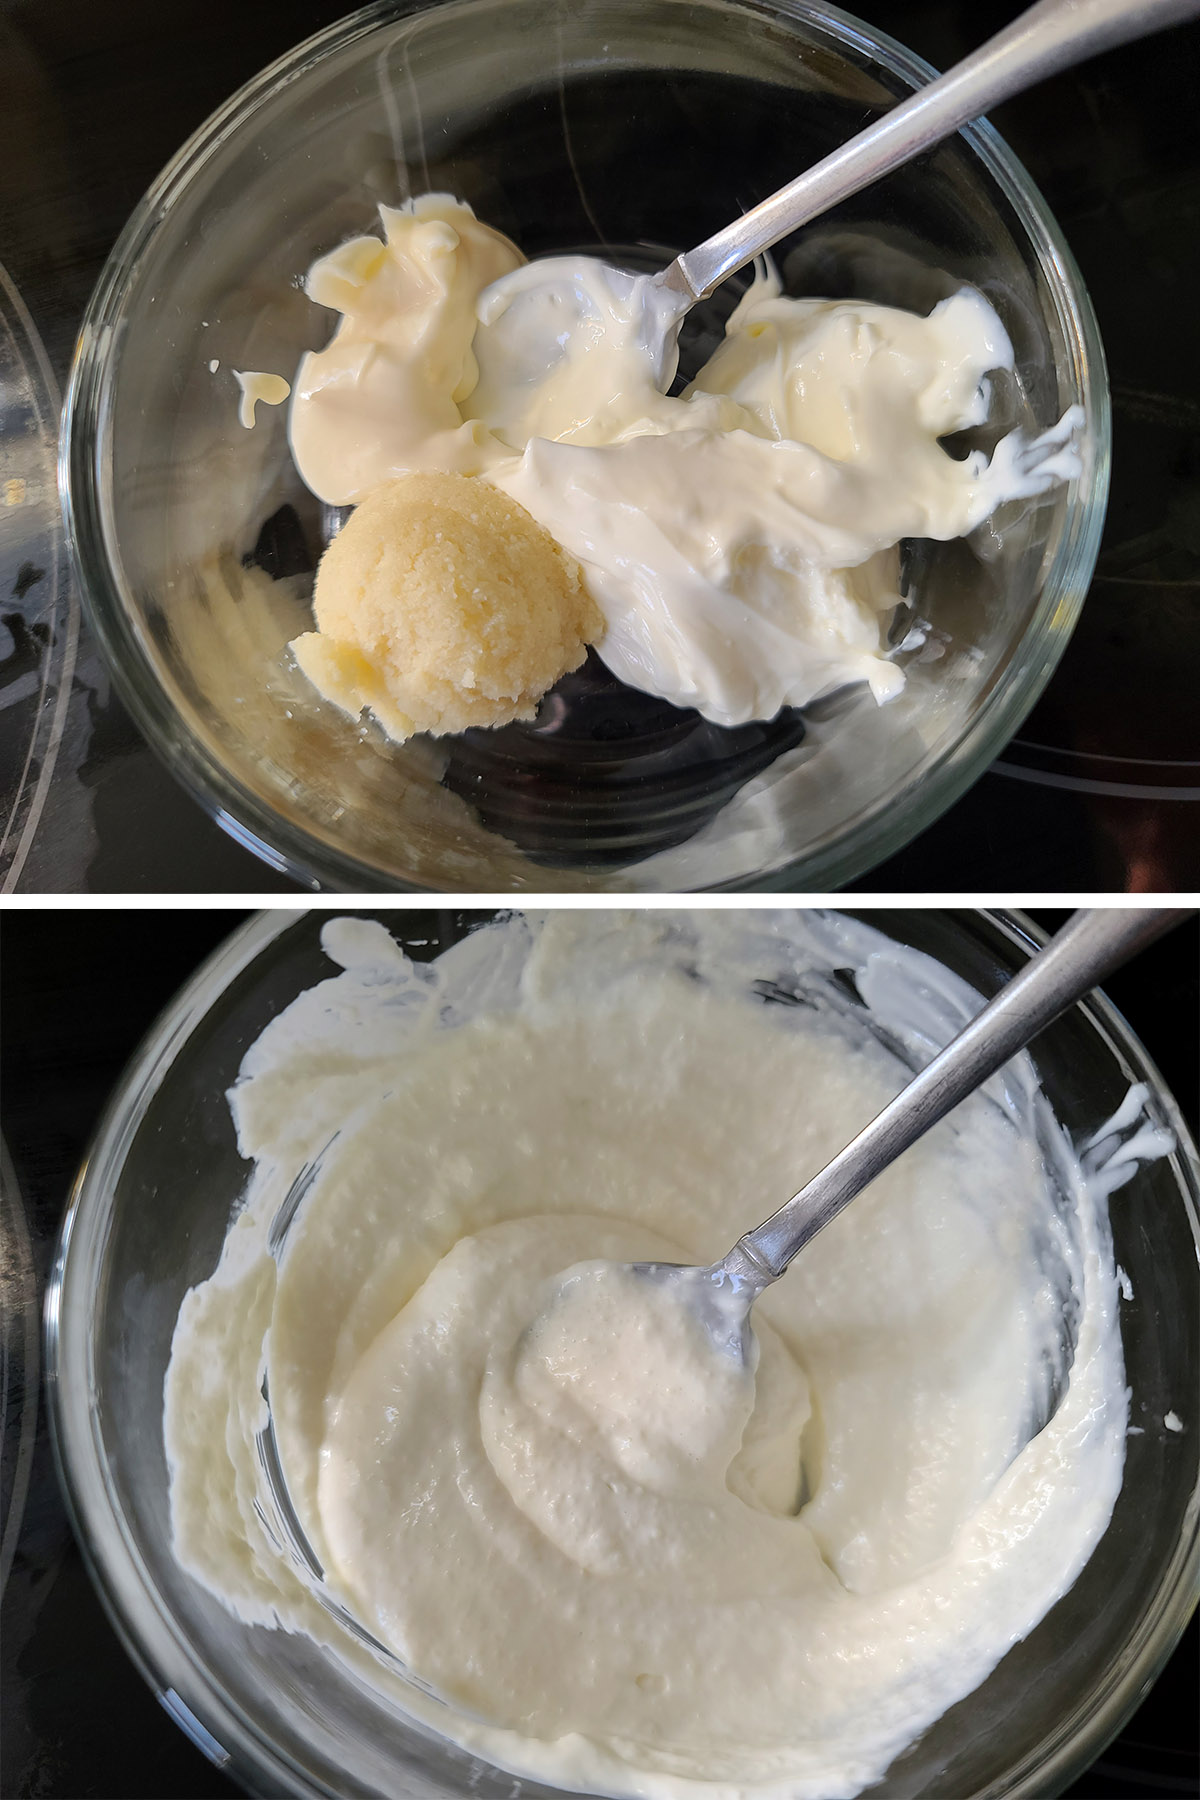 A two part image showing the horseradish sauce being mixed together.